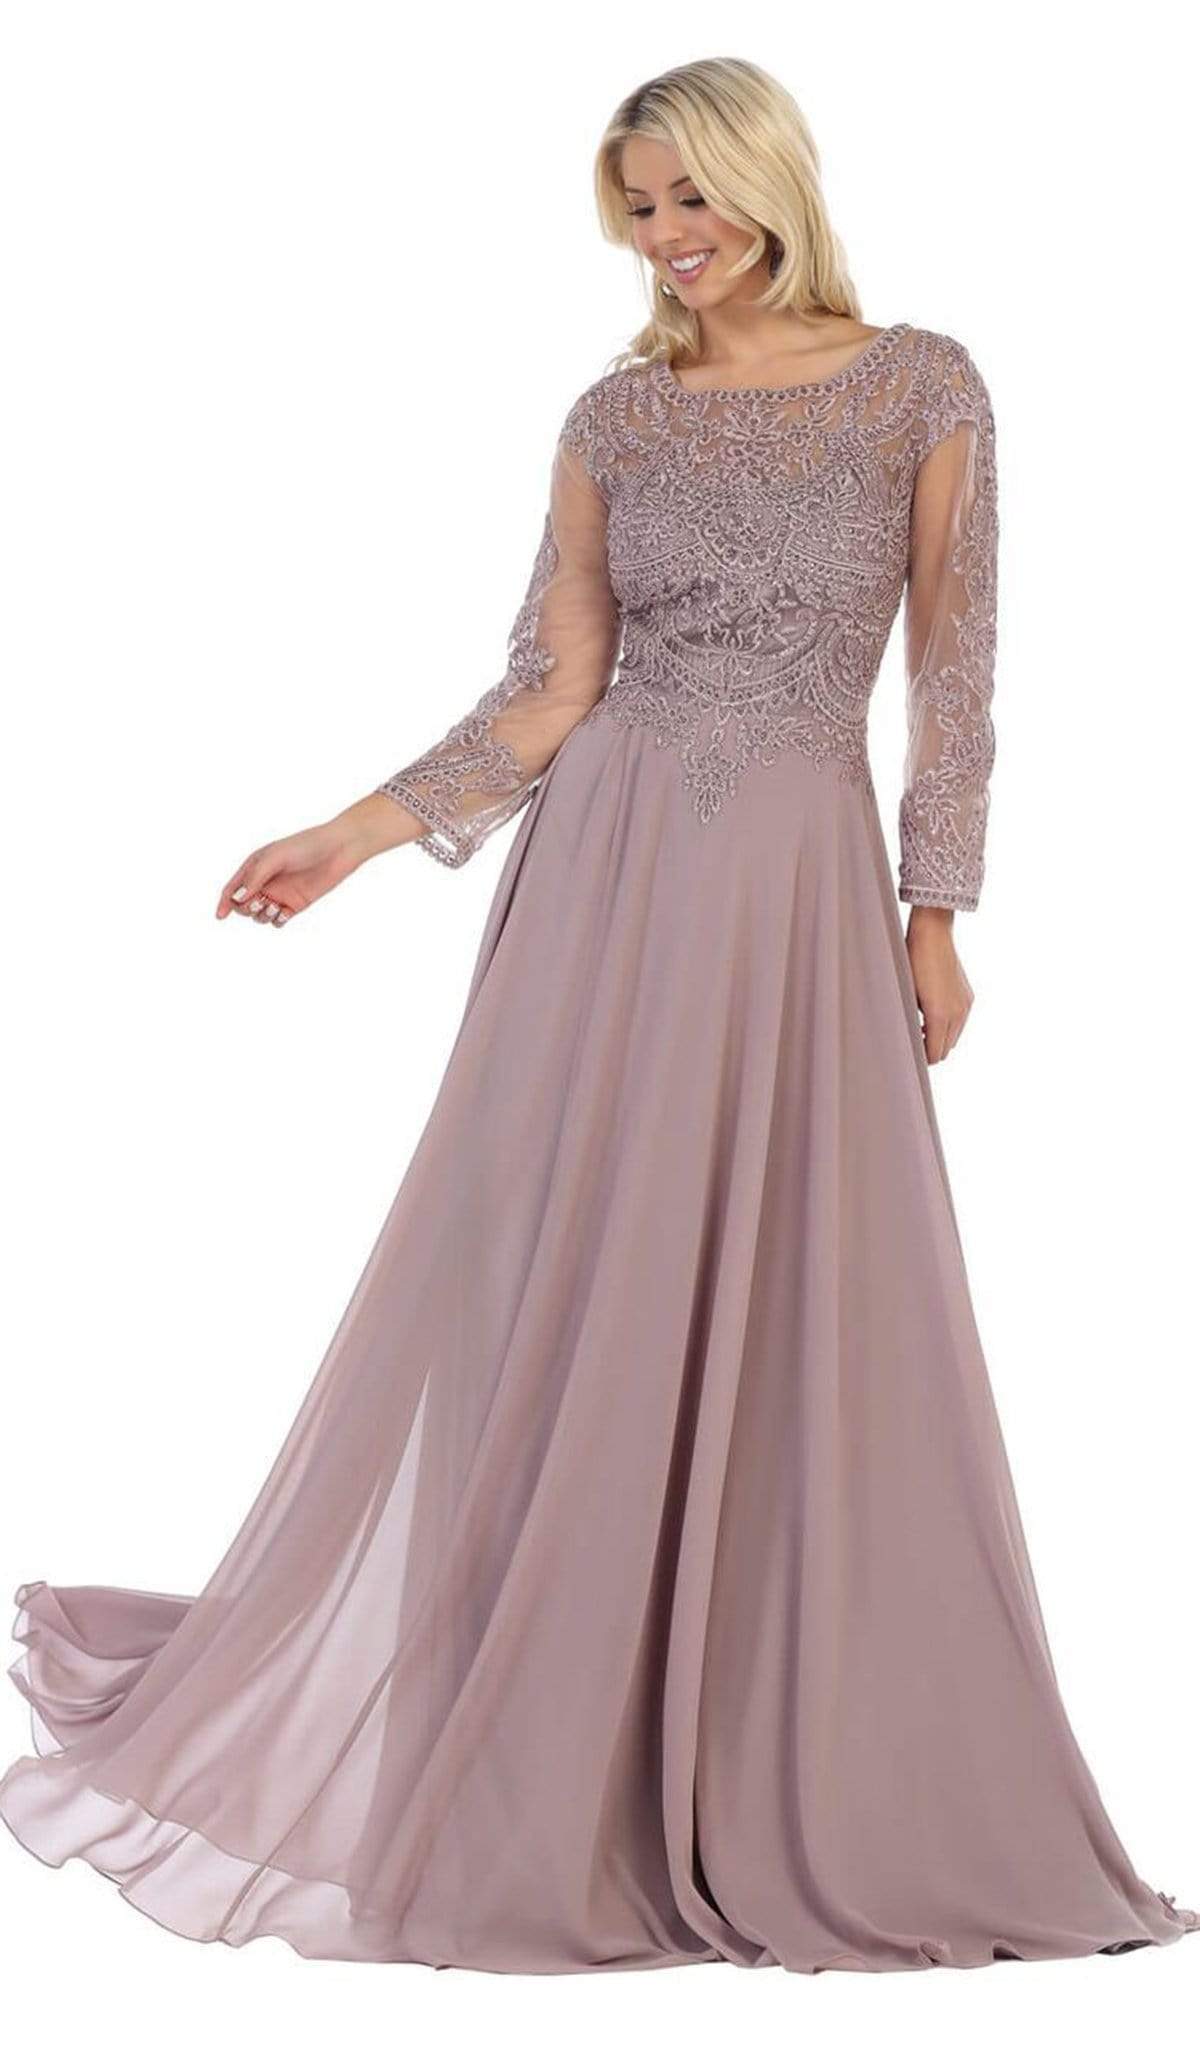 May Queen - MQ1615B Applique Long Sleeve A-line Dress Special Occasion Dress 6XL / Mauve